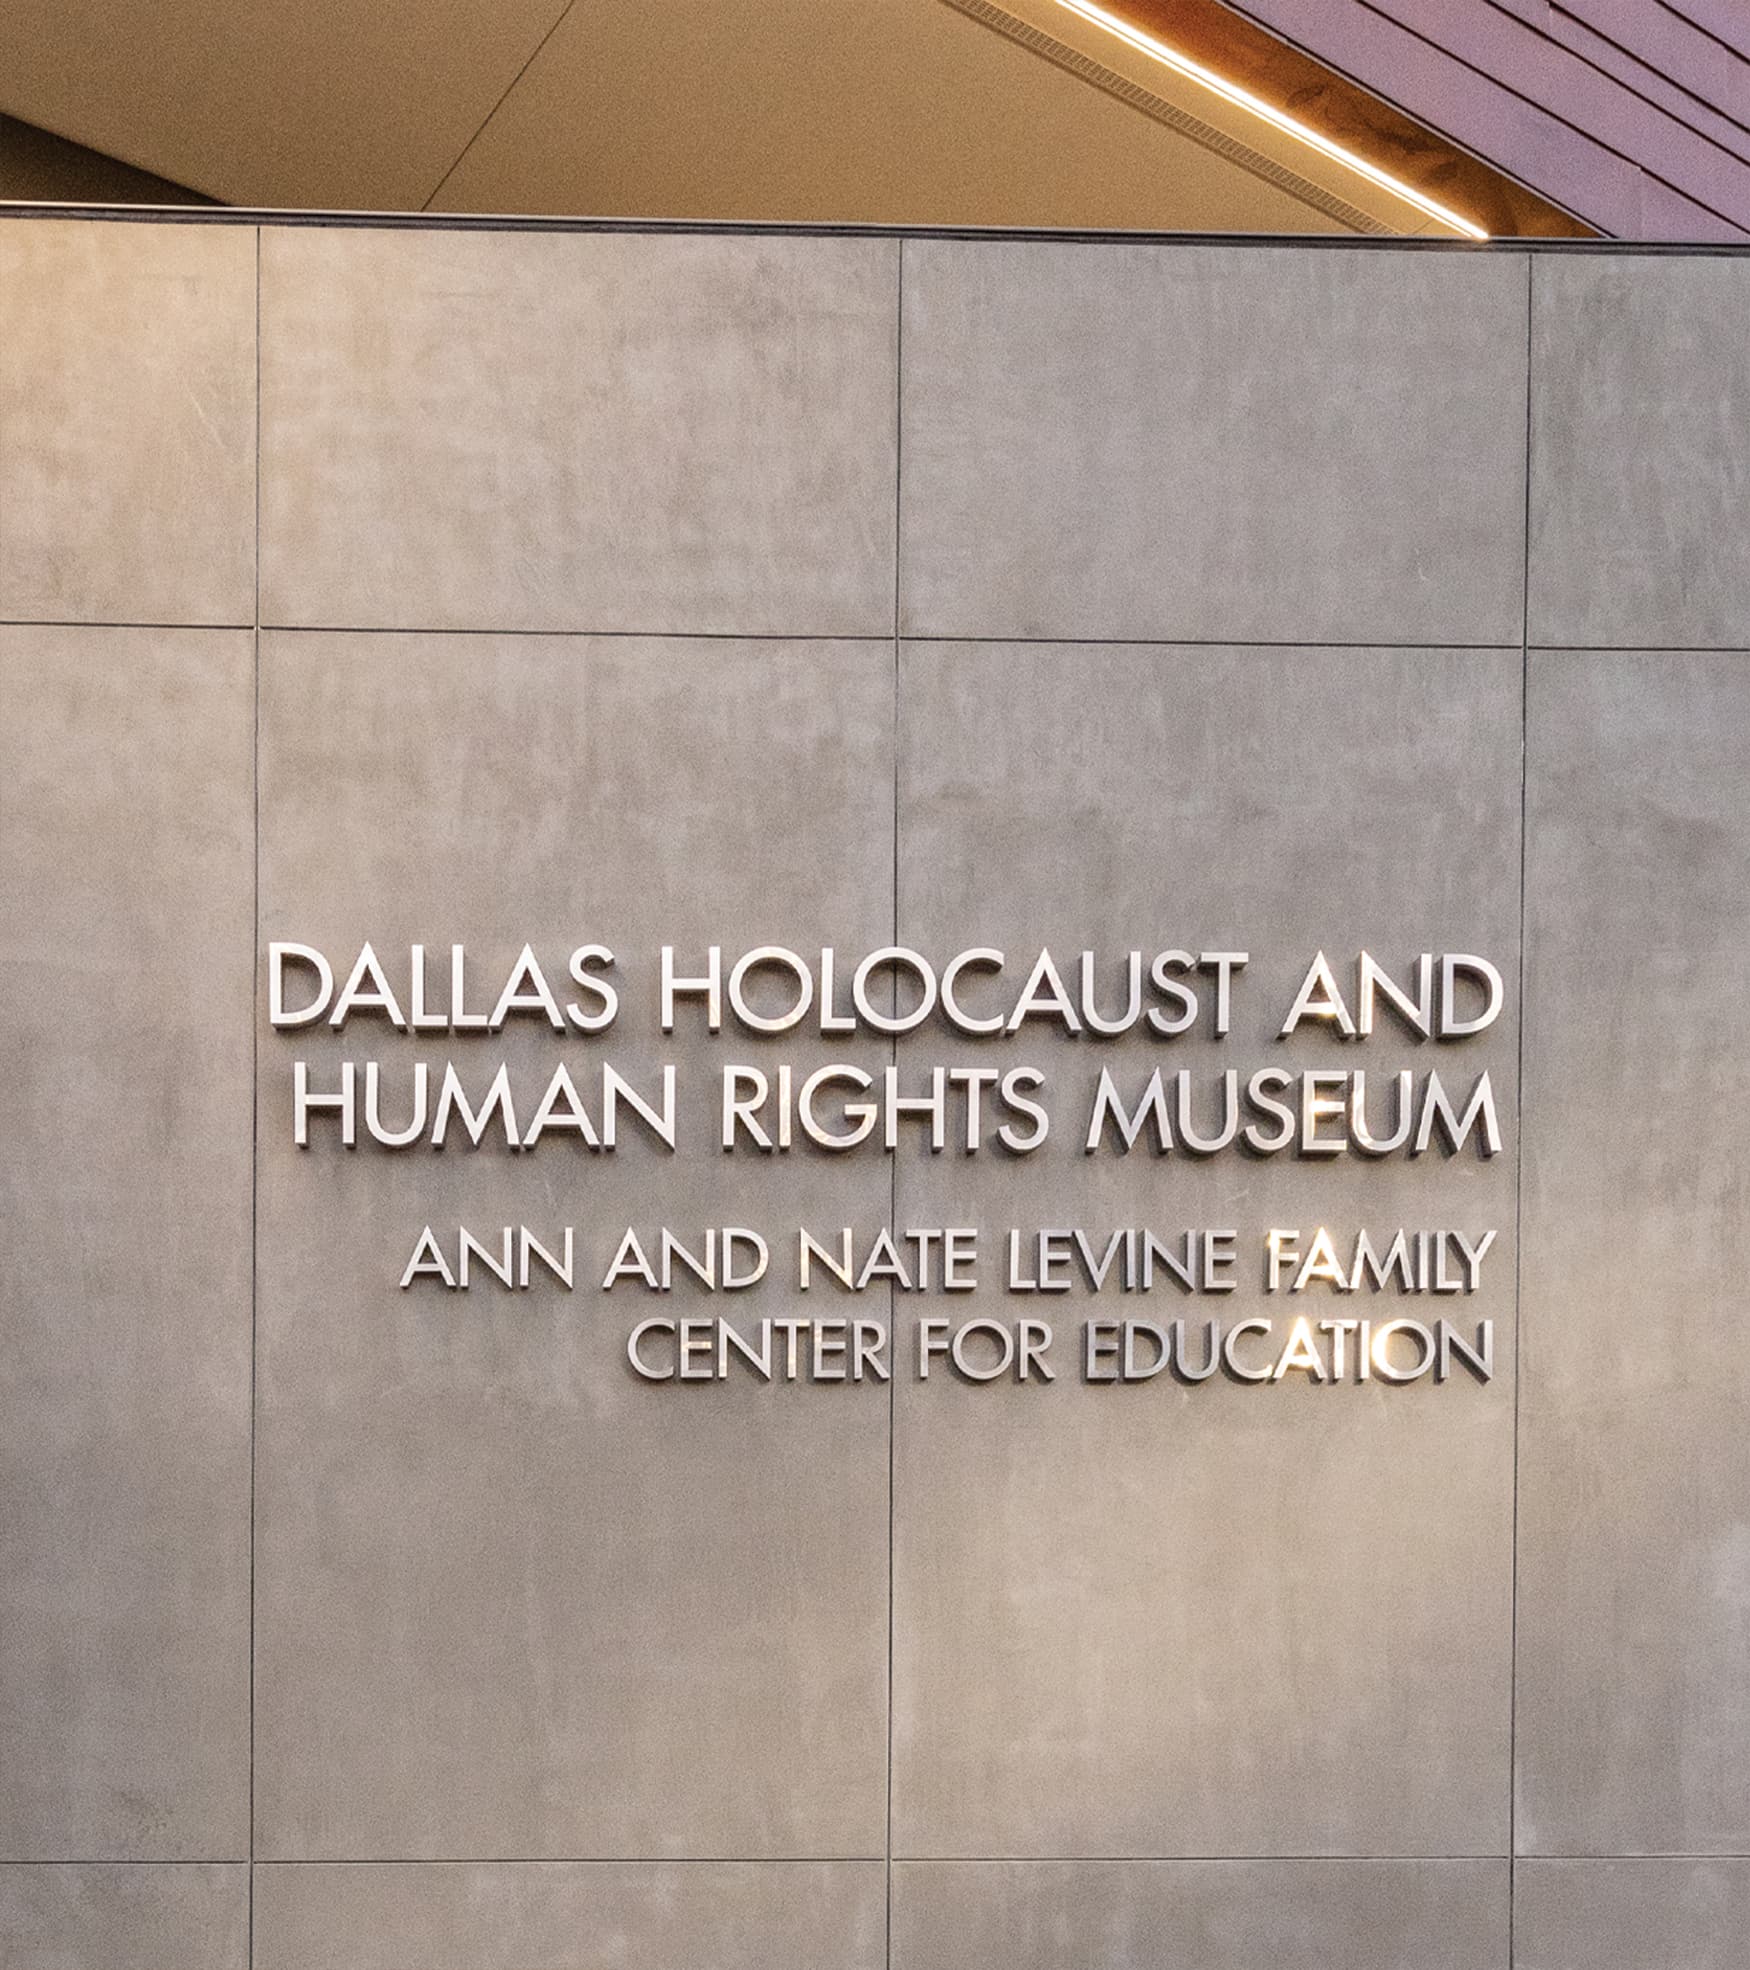 Dallas Holocaust and Human Rights Museum project identity signage